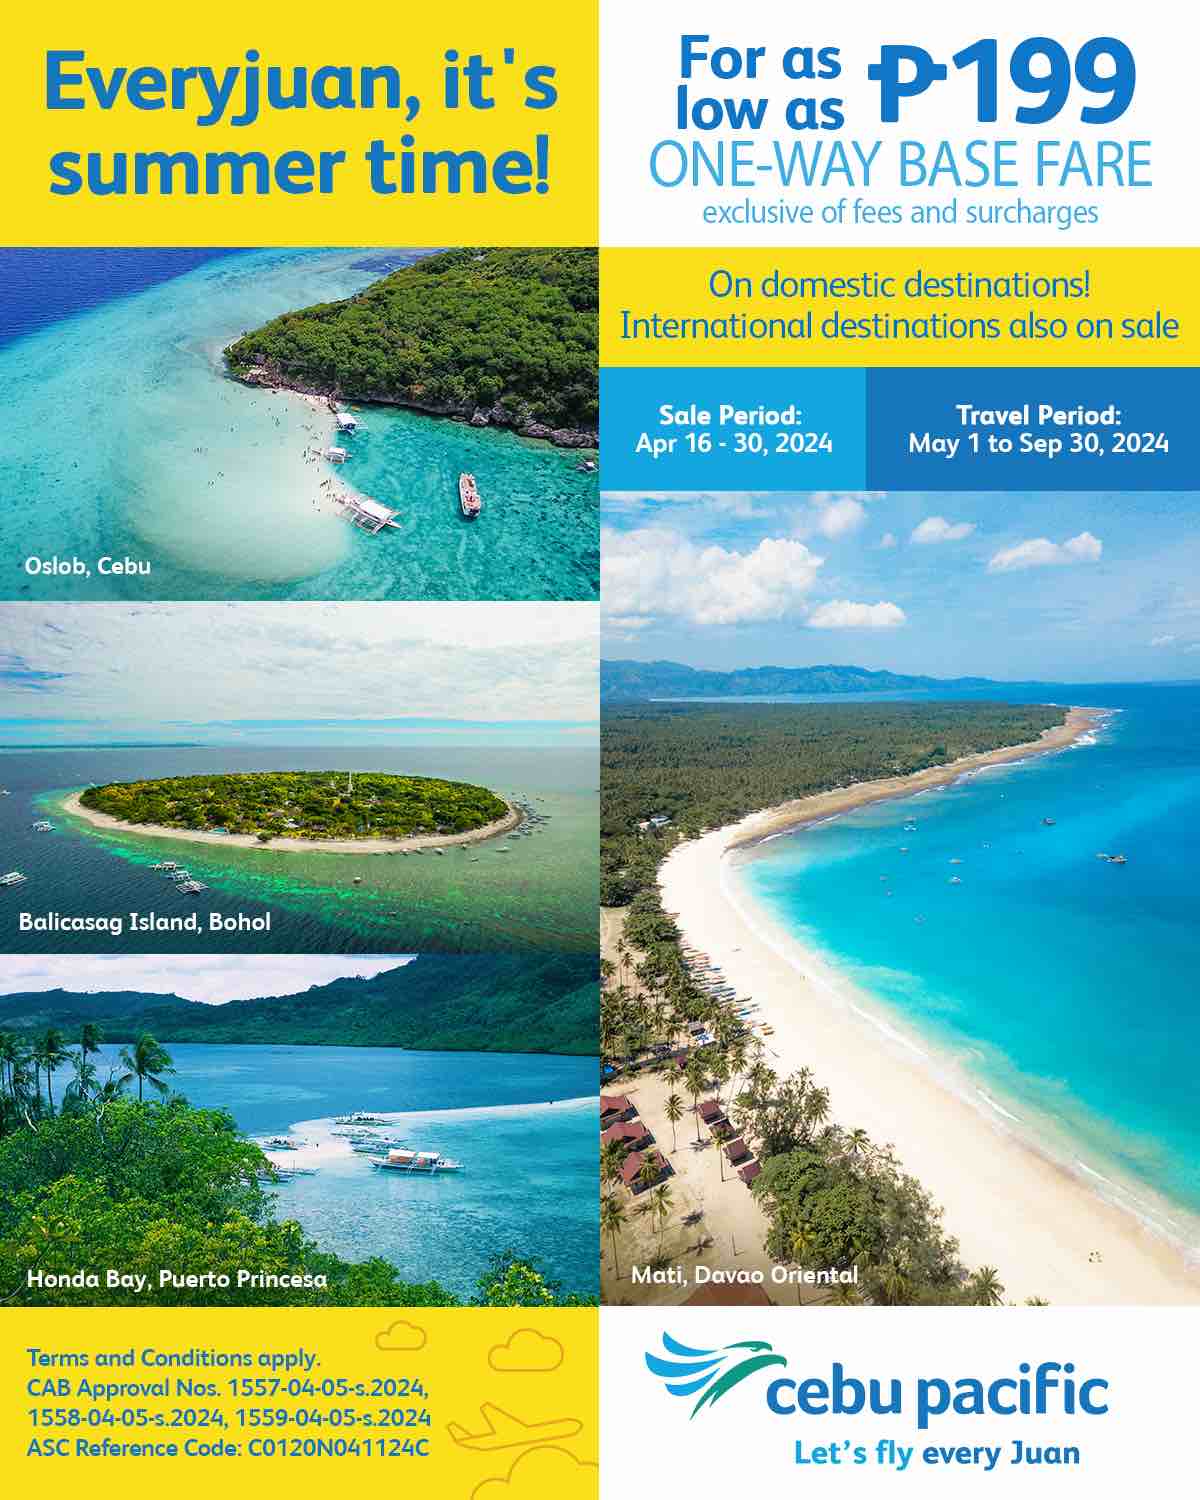 cebu pacific offers one-way base fares starting at p199 until april 30